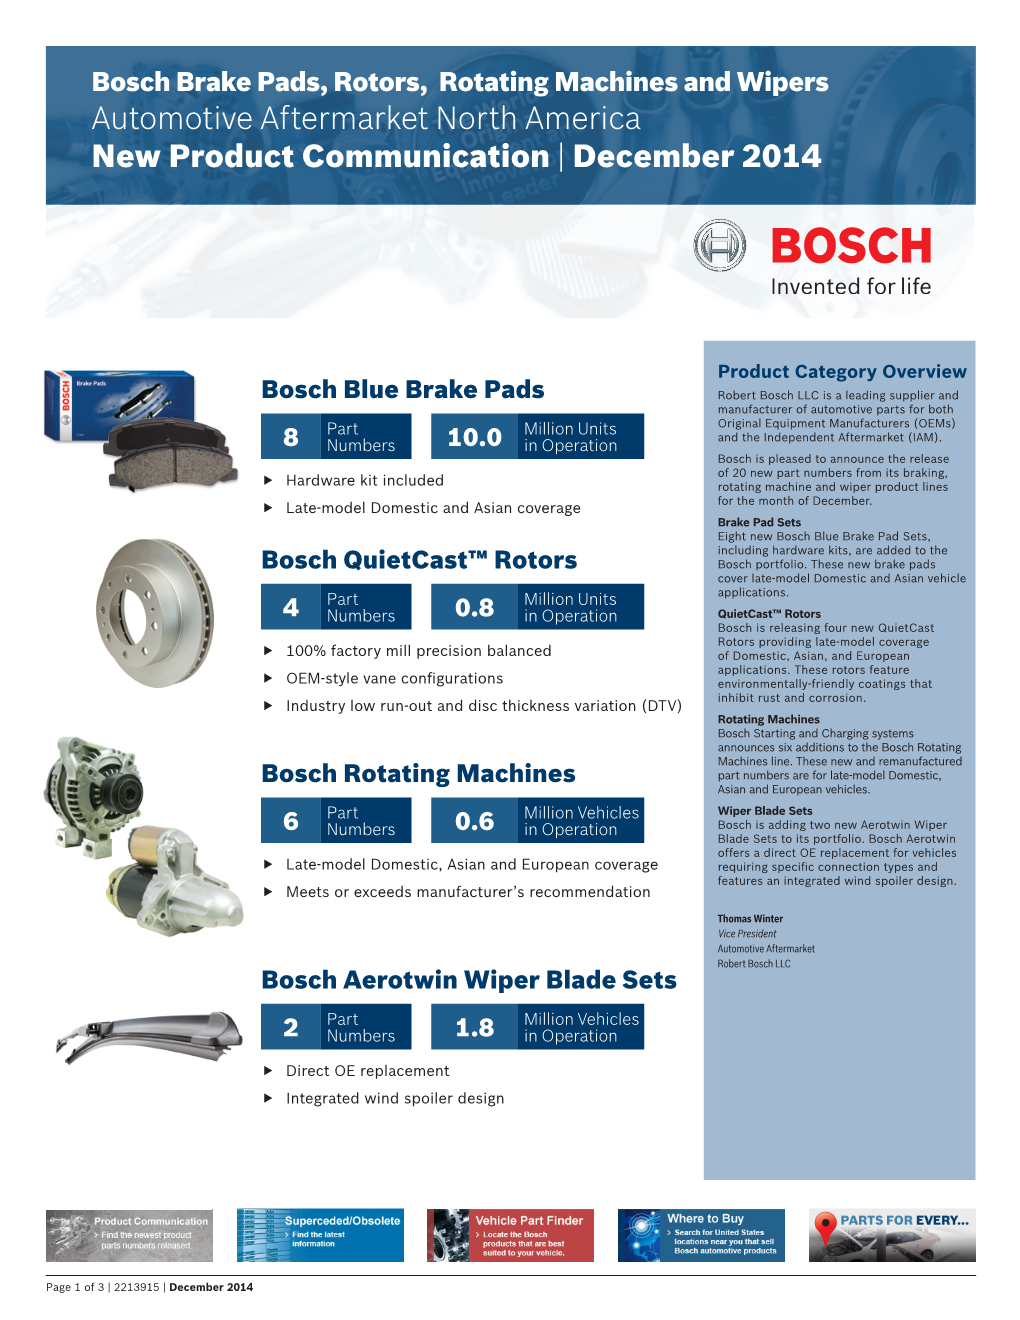 Automotive Aftermarket North America New Product Communication | December 2014